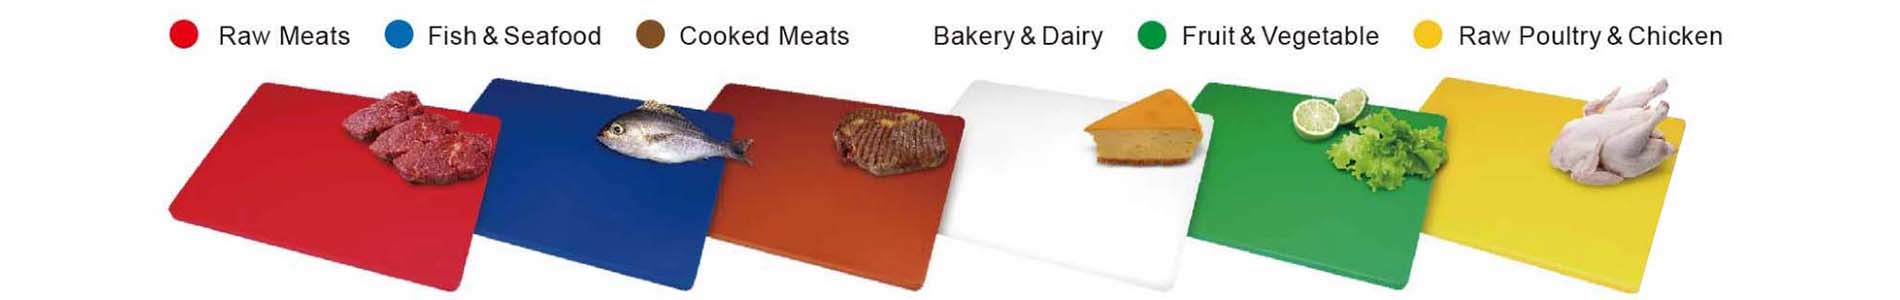 High Density Colour Coded Chopping Boards | 6 Colour Options